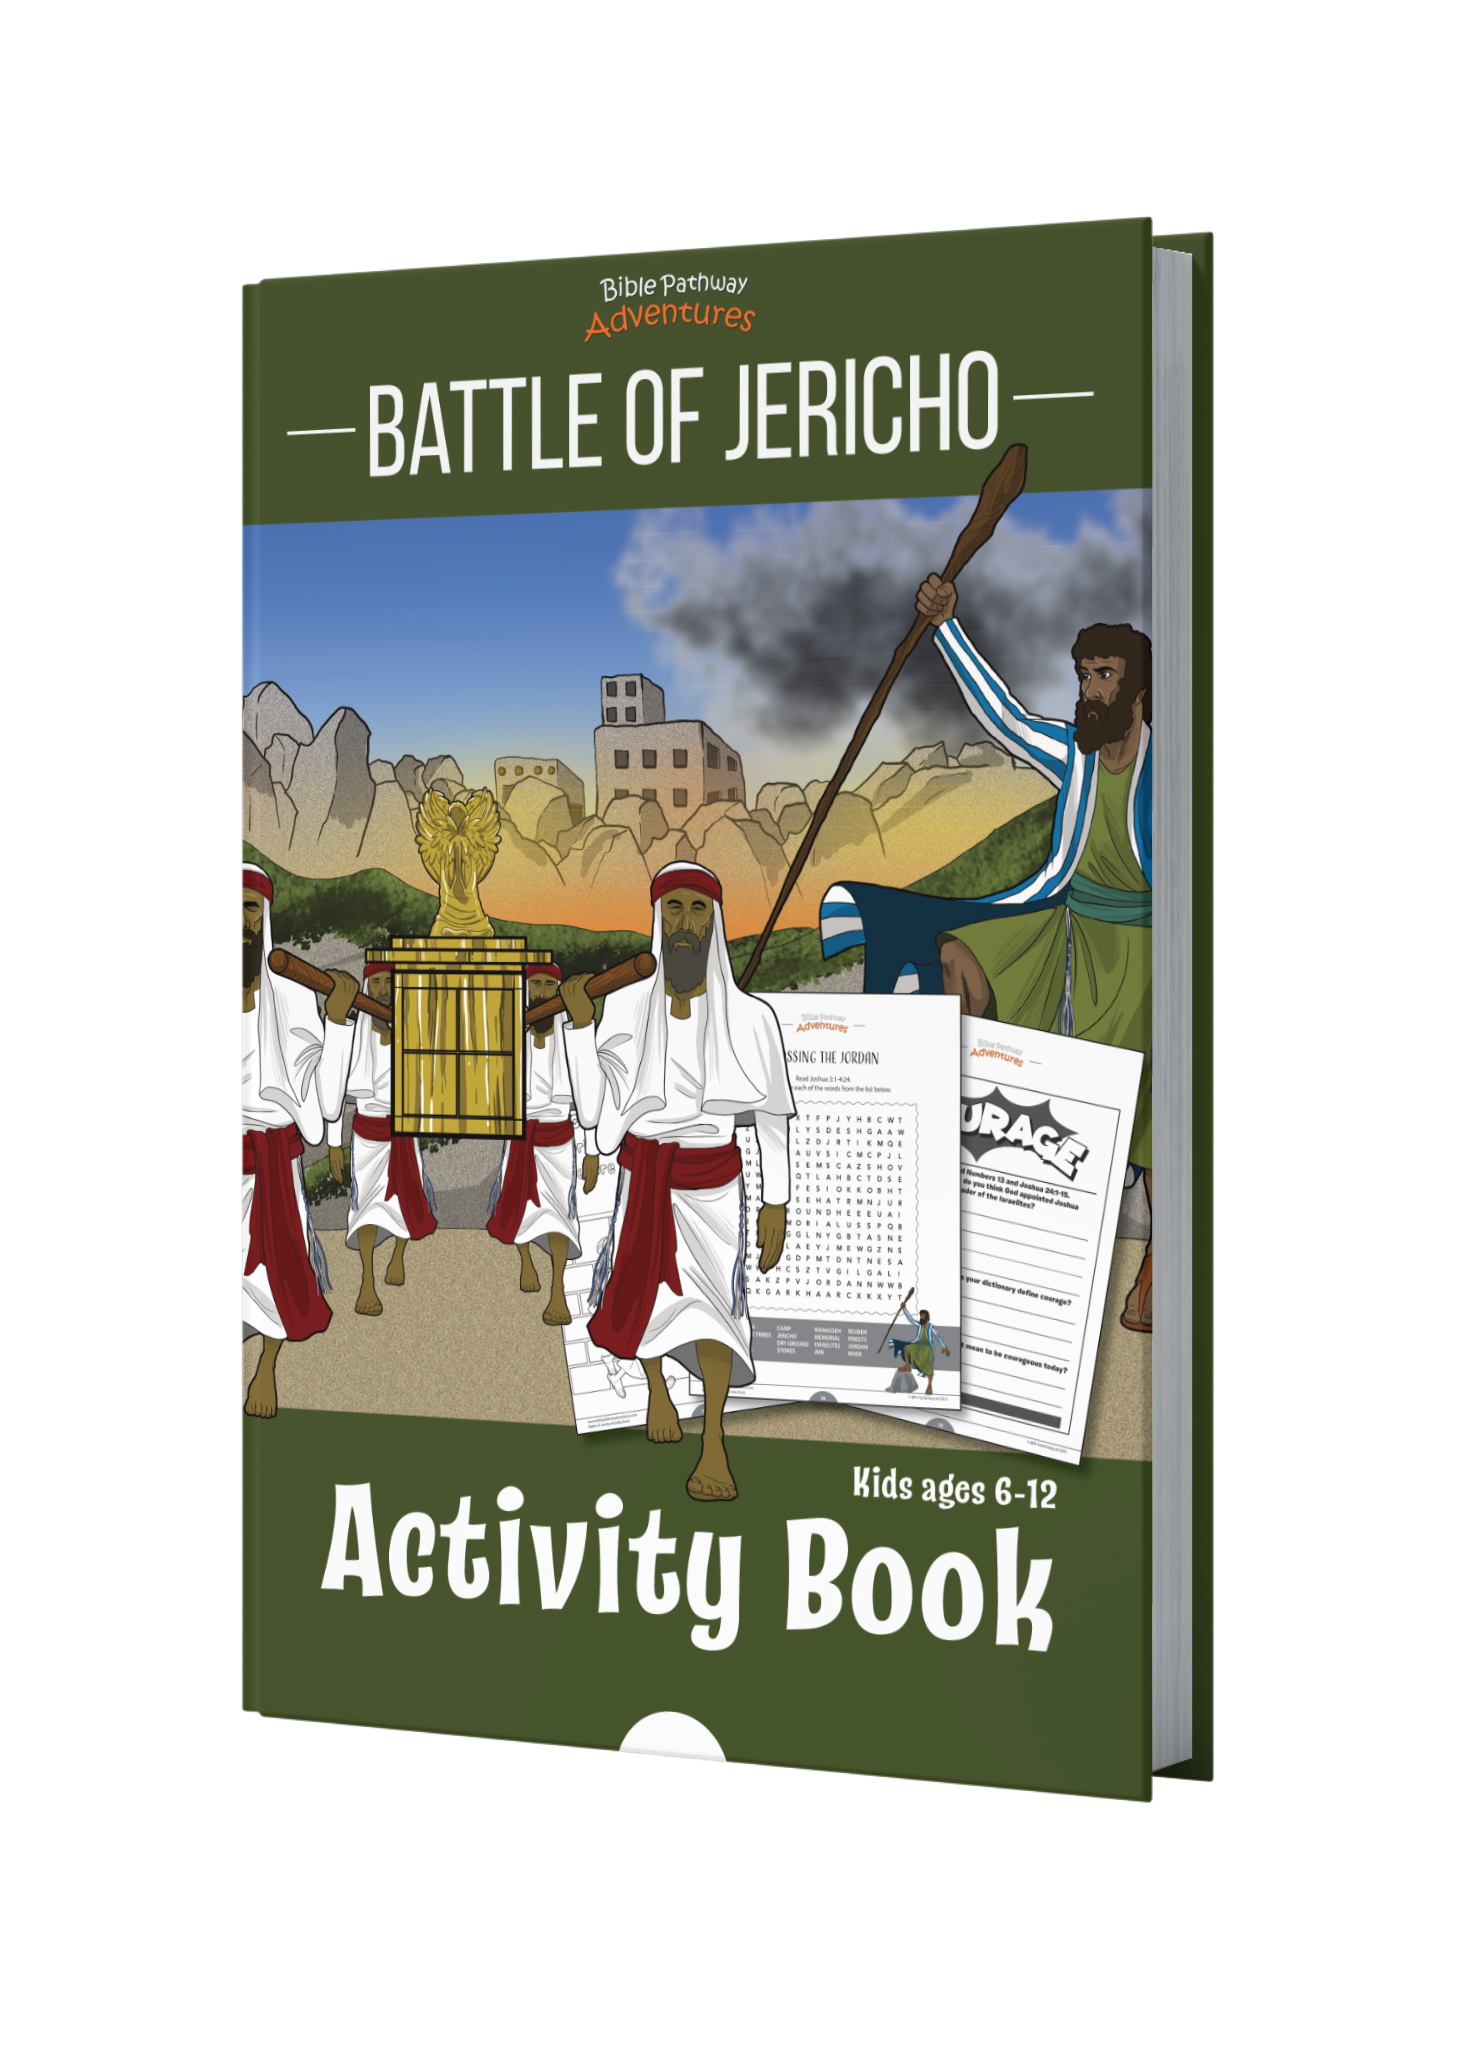 Battle of Jericho book cover